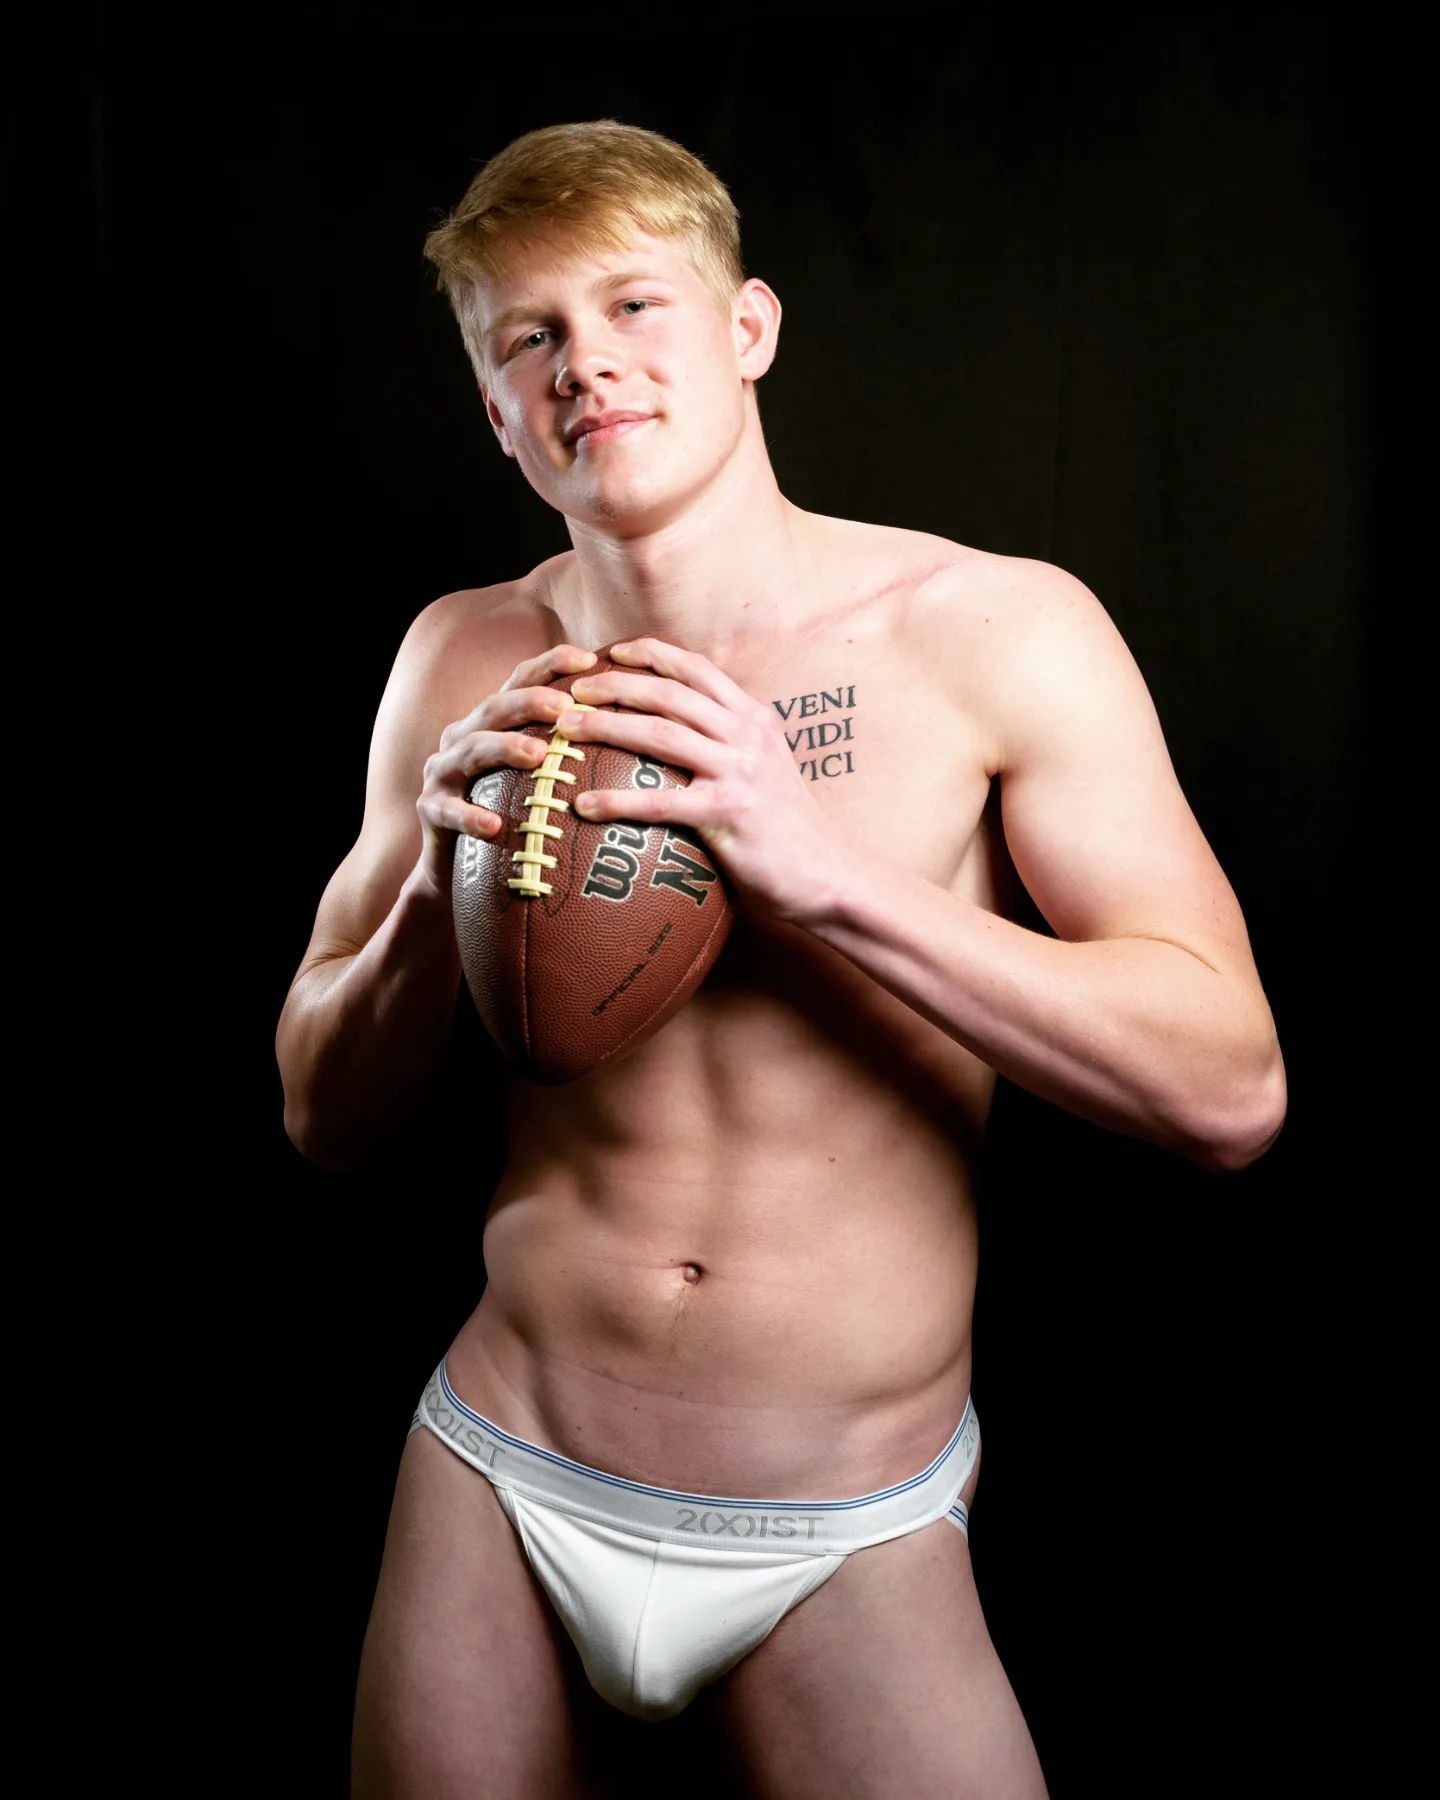 Who you got in the #superbowl today? Philly or KC? Maverick Male James is ready for some action. 

#football #malemodel #jock #jockstrap #underwearmodel